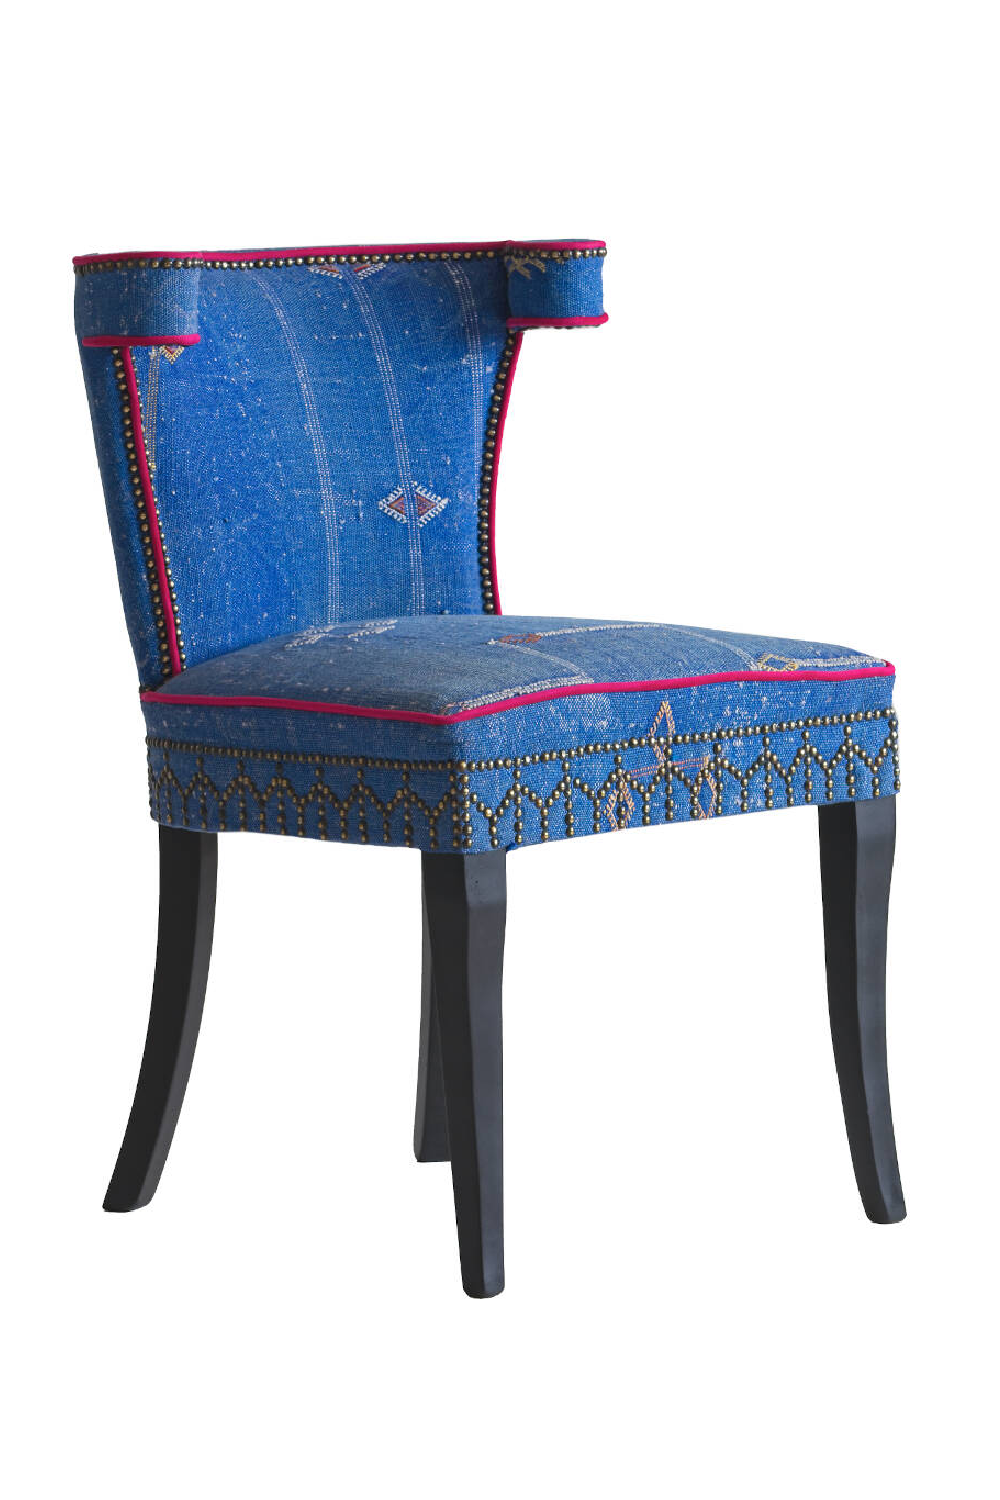 Cactus Silk Moroccan Dining Chair | Andrew Martin Vincent | Oroa.com